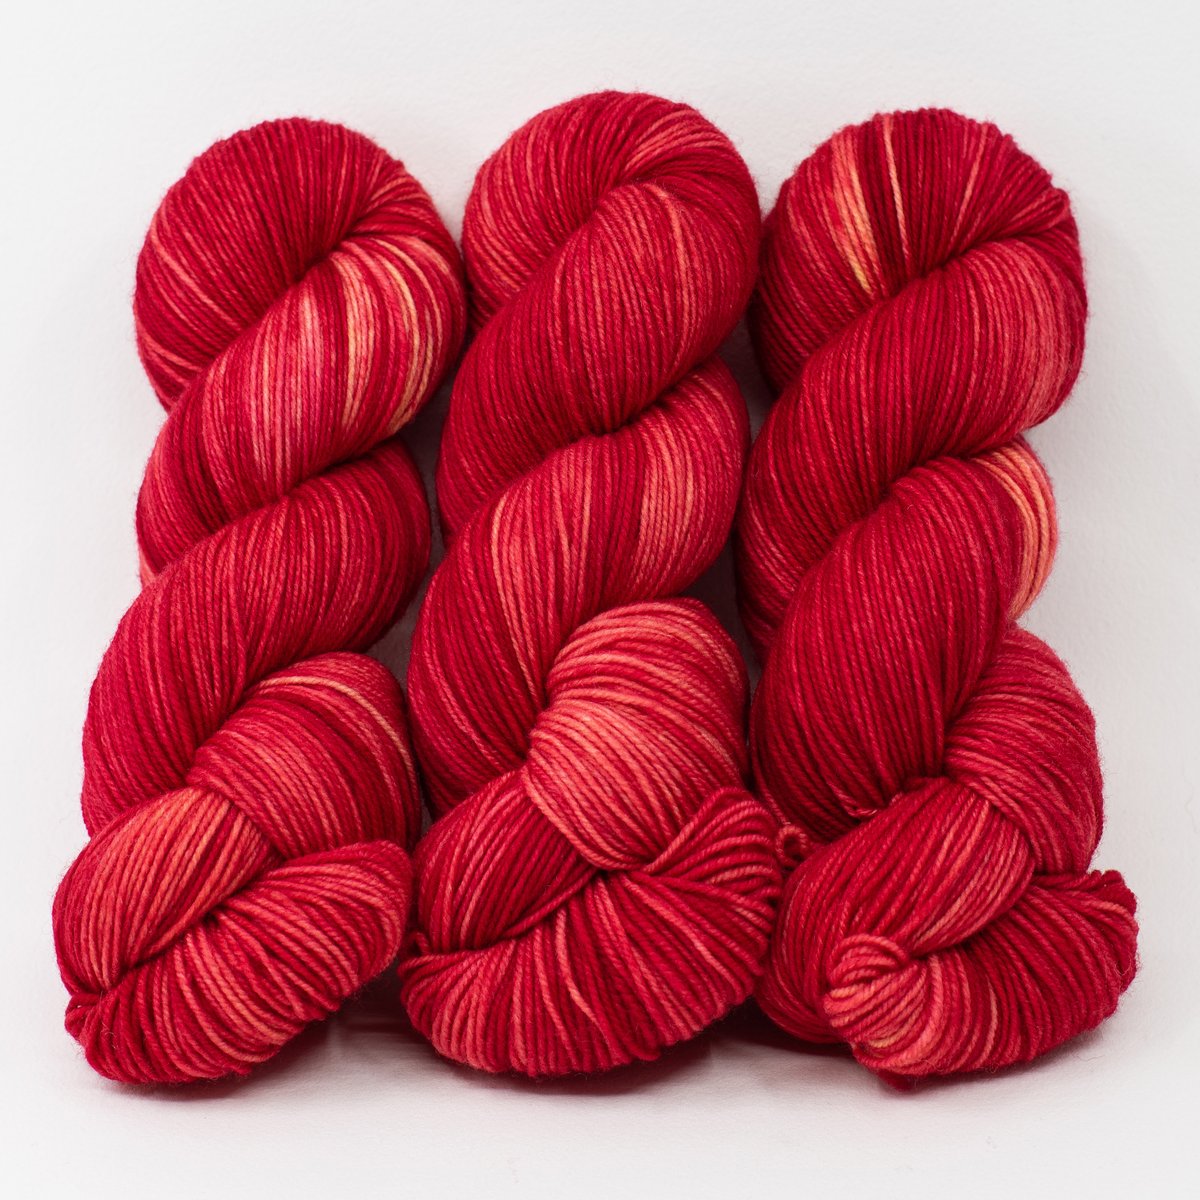 Apple - Passion 8 Fingering - Dyed Stock